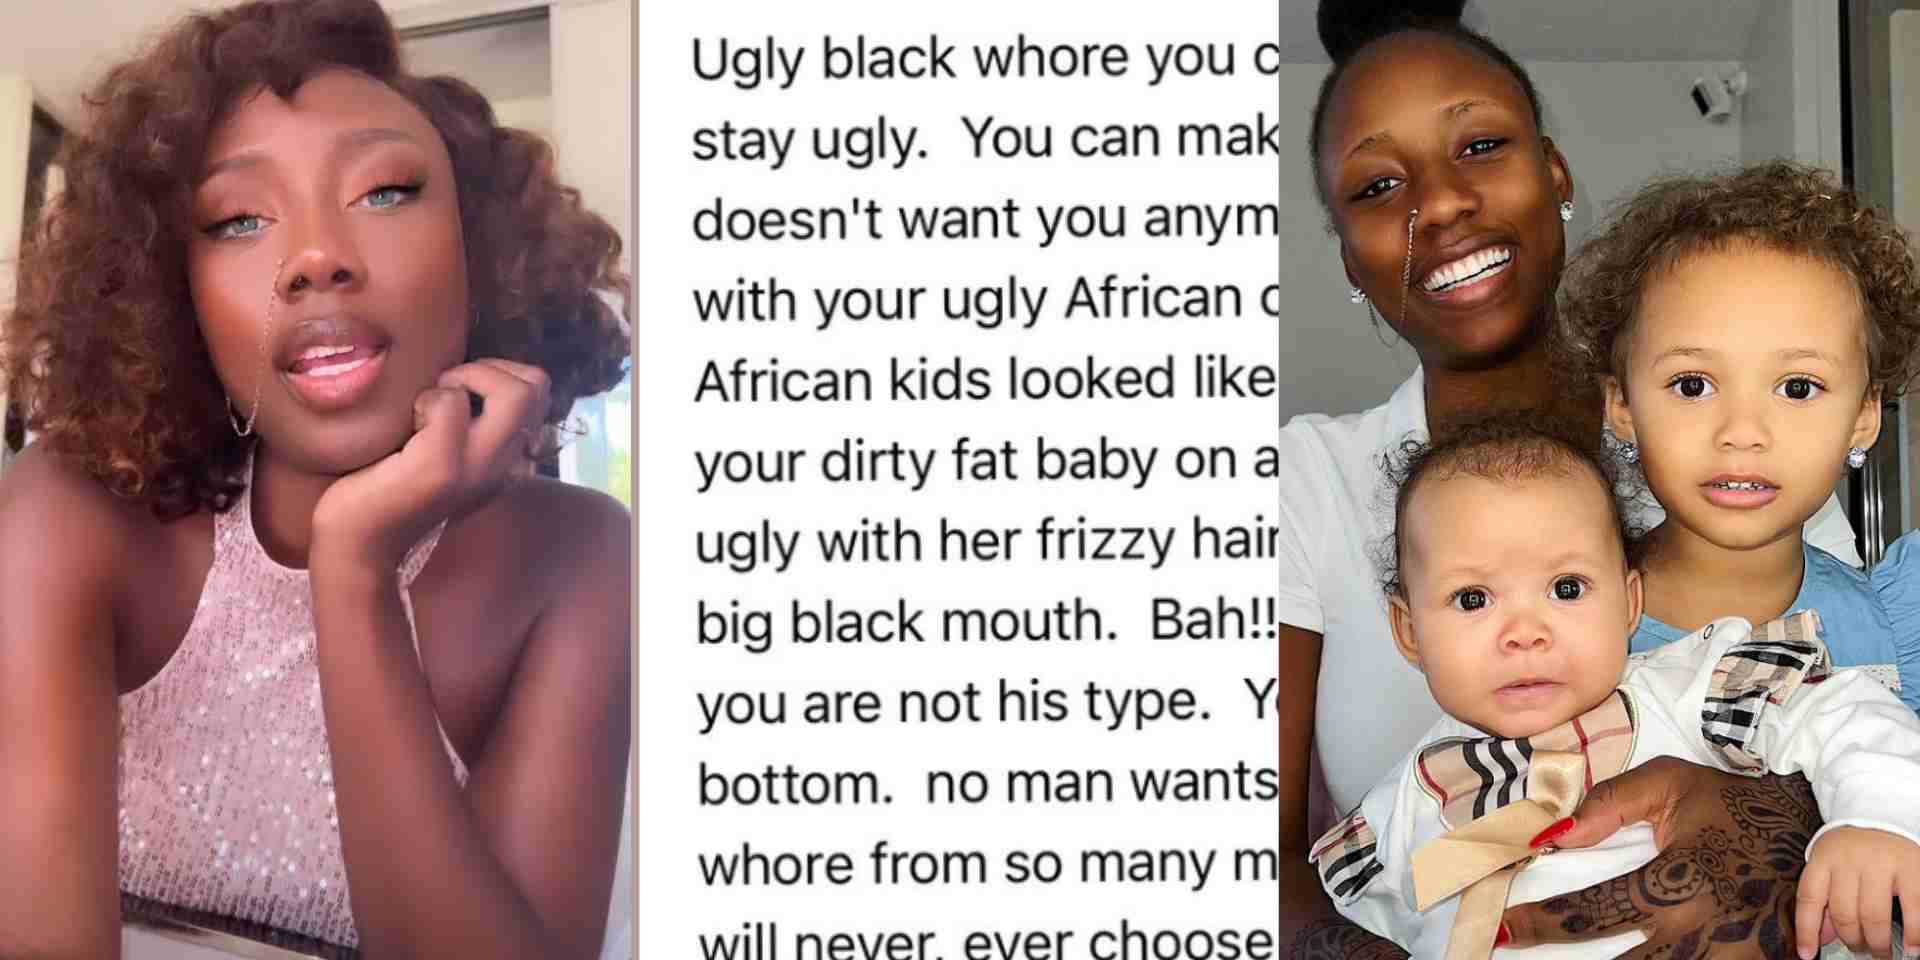 Do you still want to be famous - Korra Obidi asks as she shares vile message she received from racist who lambasted her and her kids